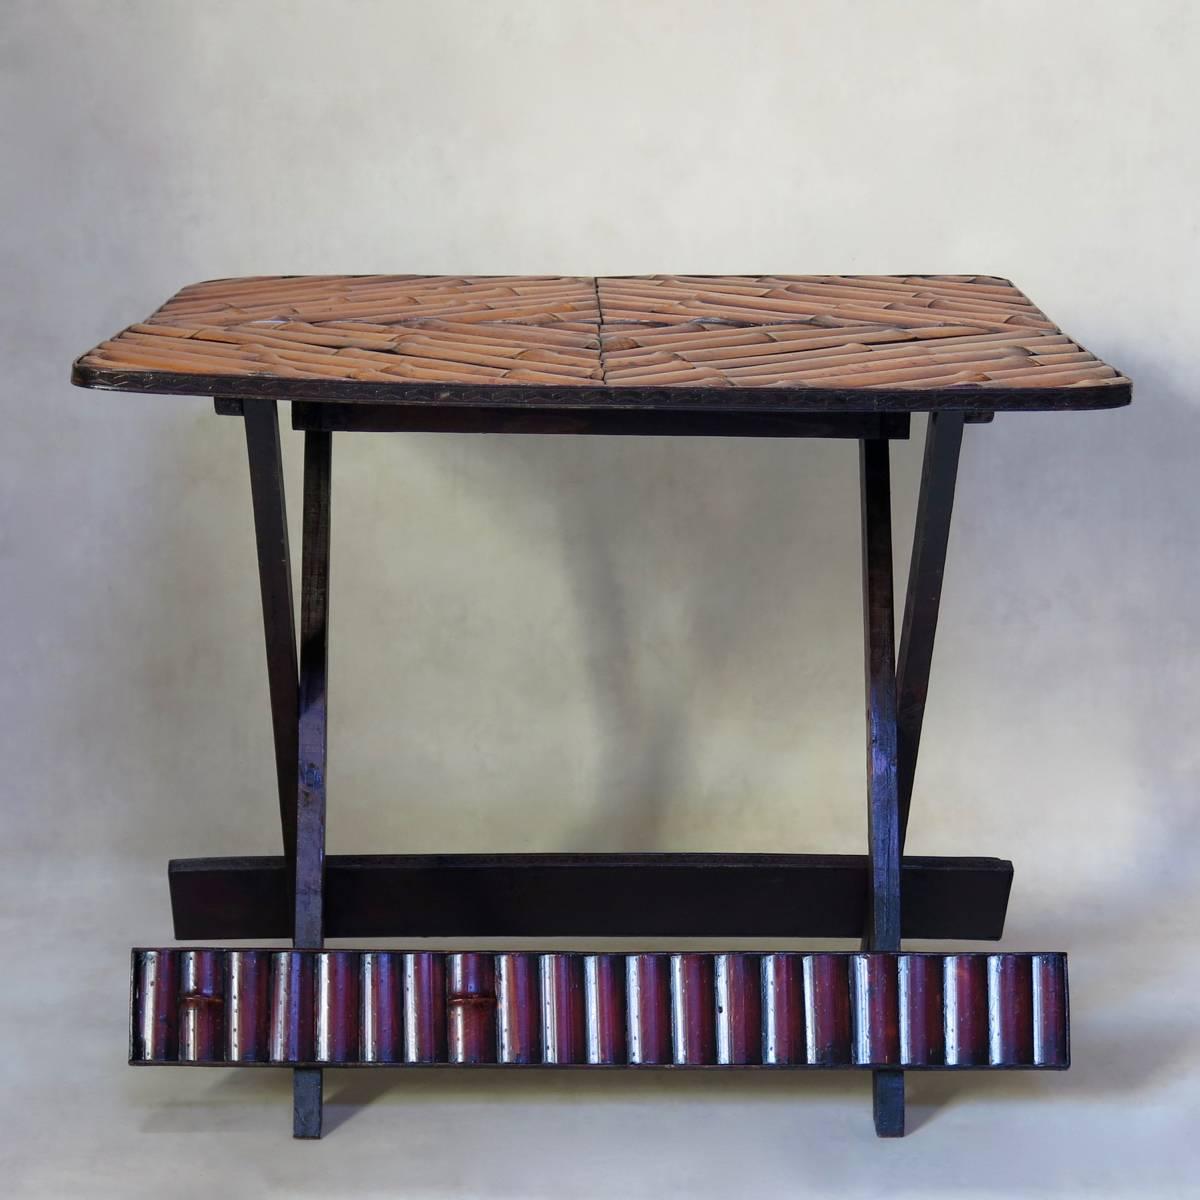 Chic, vintage folding table with a patterned top, and chevron-decorated surround.